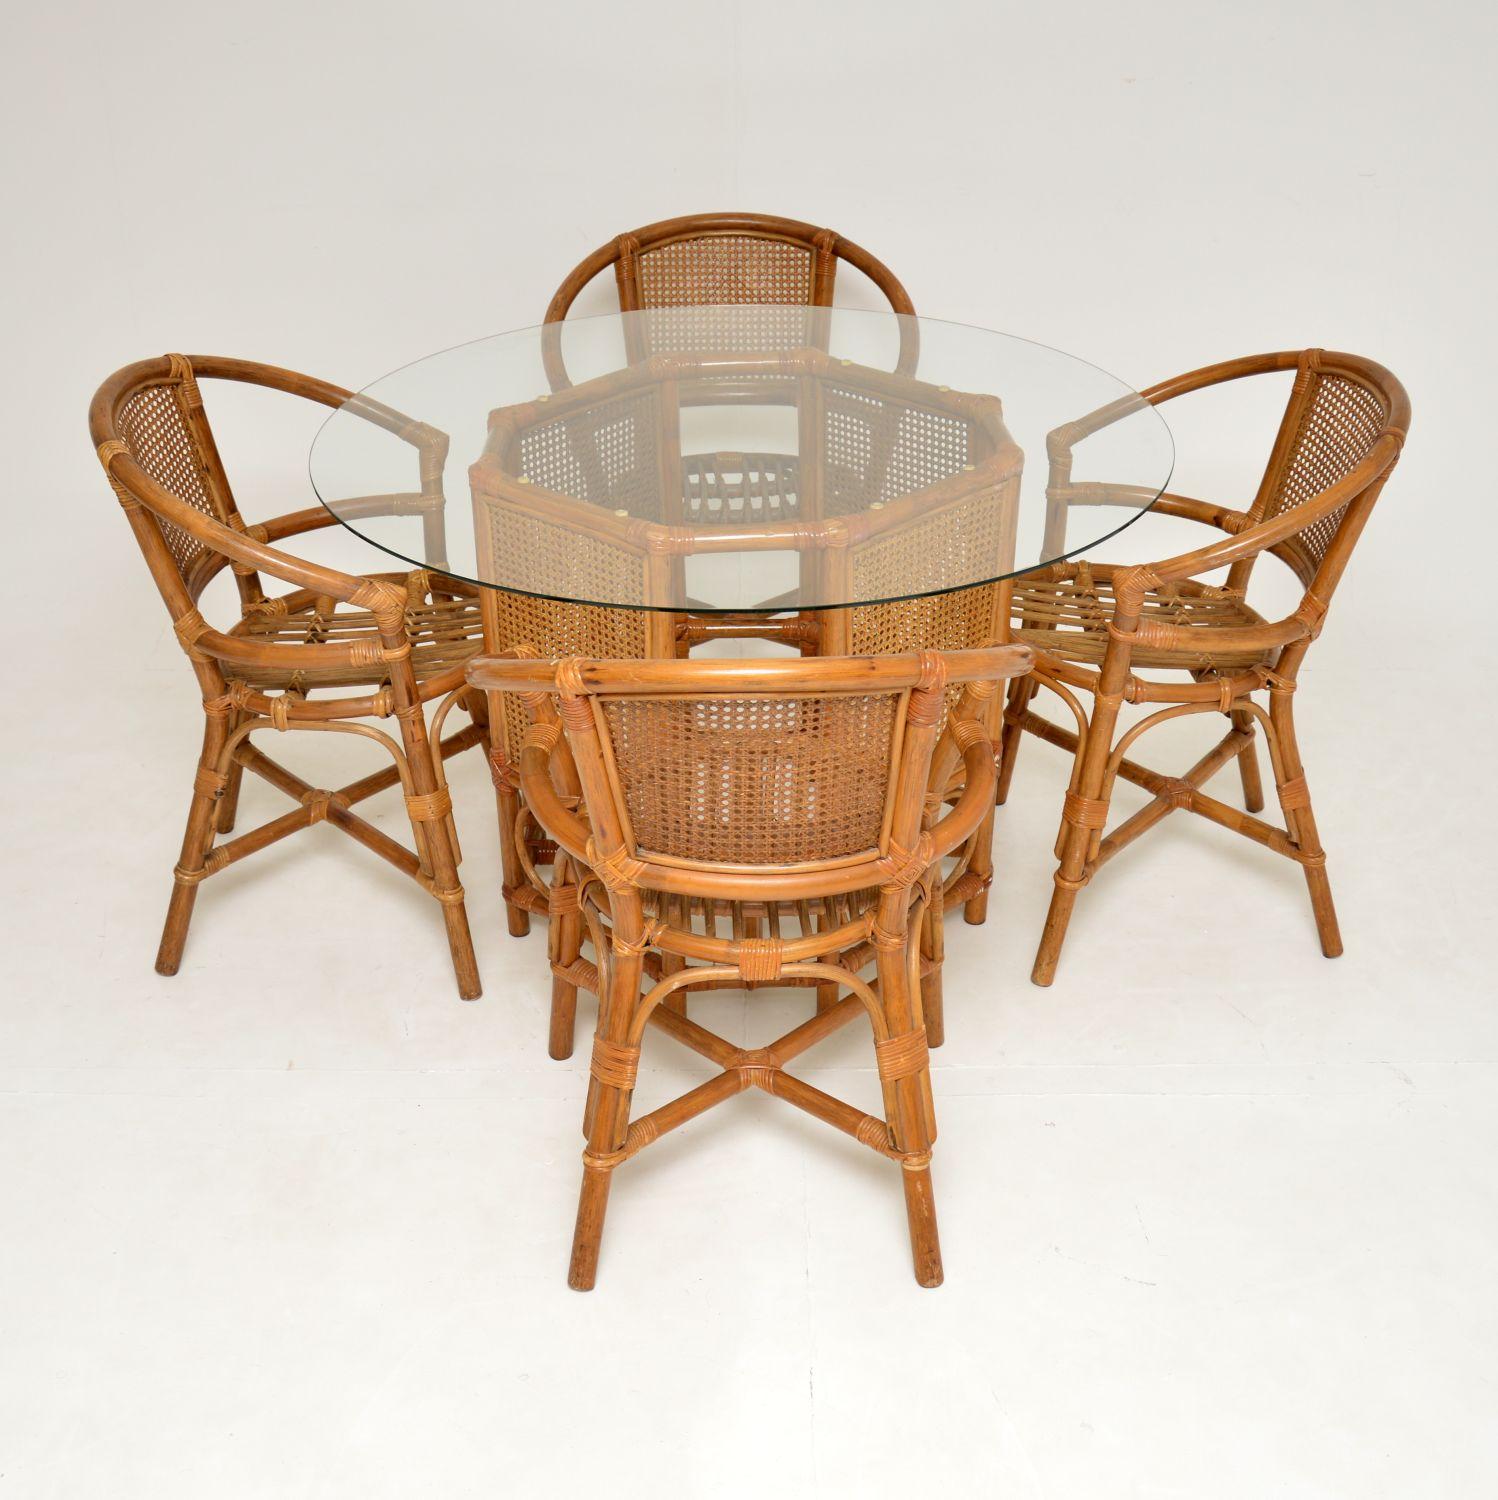 A wonderful original vintage dining / kitchen table and chairs in bamboo and rattan, with a circular glass top. These were made in England, they date from the 1970’s.
They are beautifully made and are of lovely quality. The set is a practical and